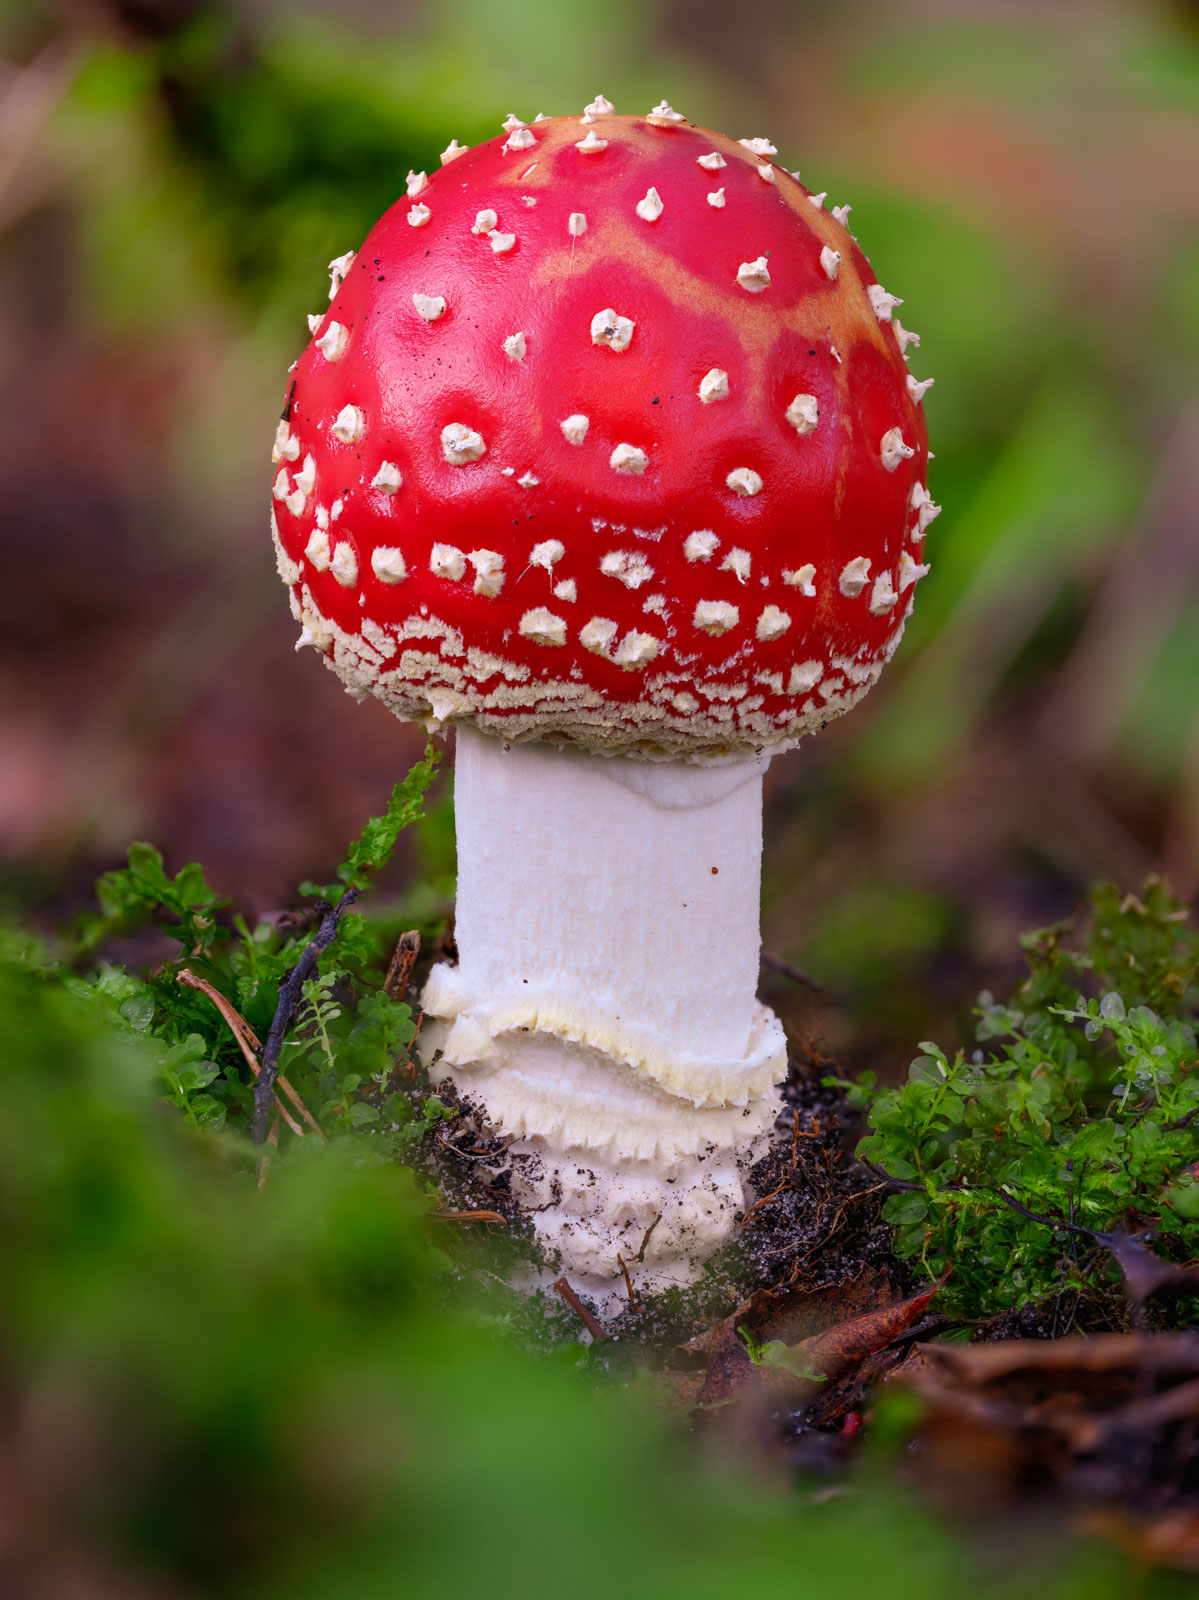 Young Fly agaric (Amanita muscaria) at  'Wistinghauser Senne' (Oerlinghausen, Germany).